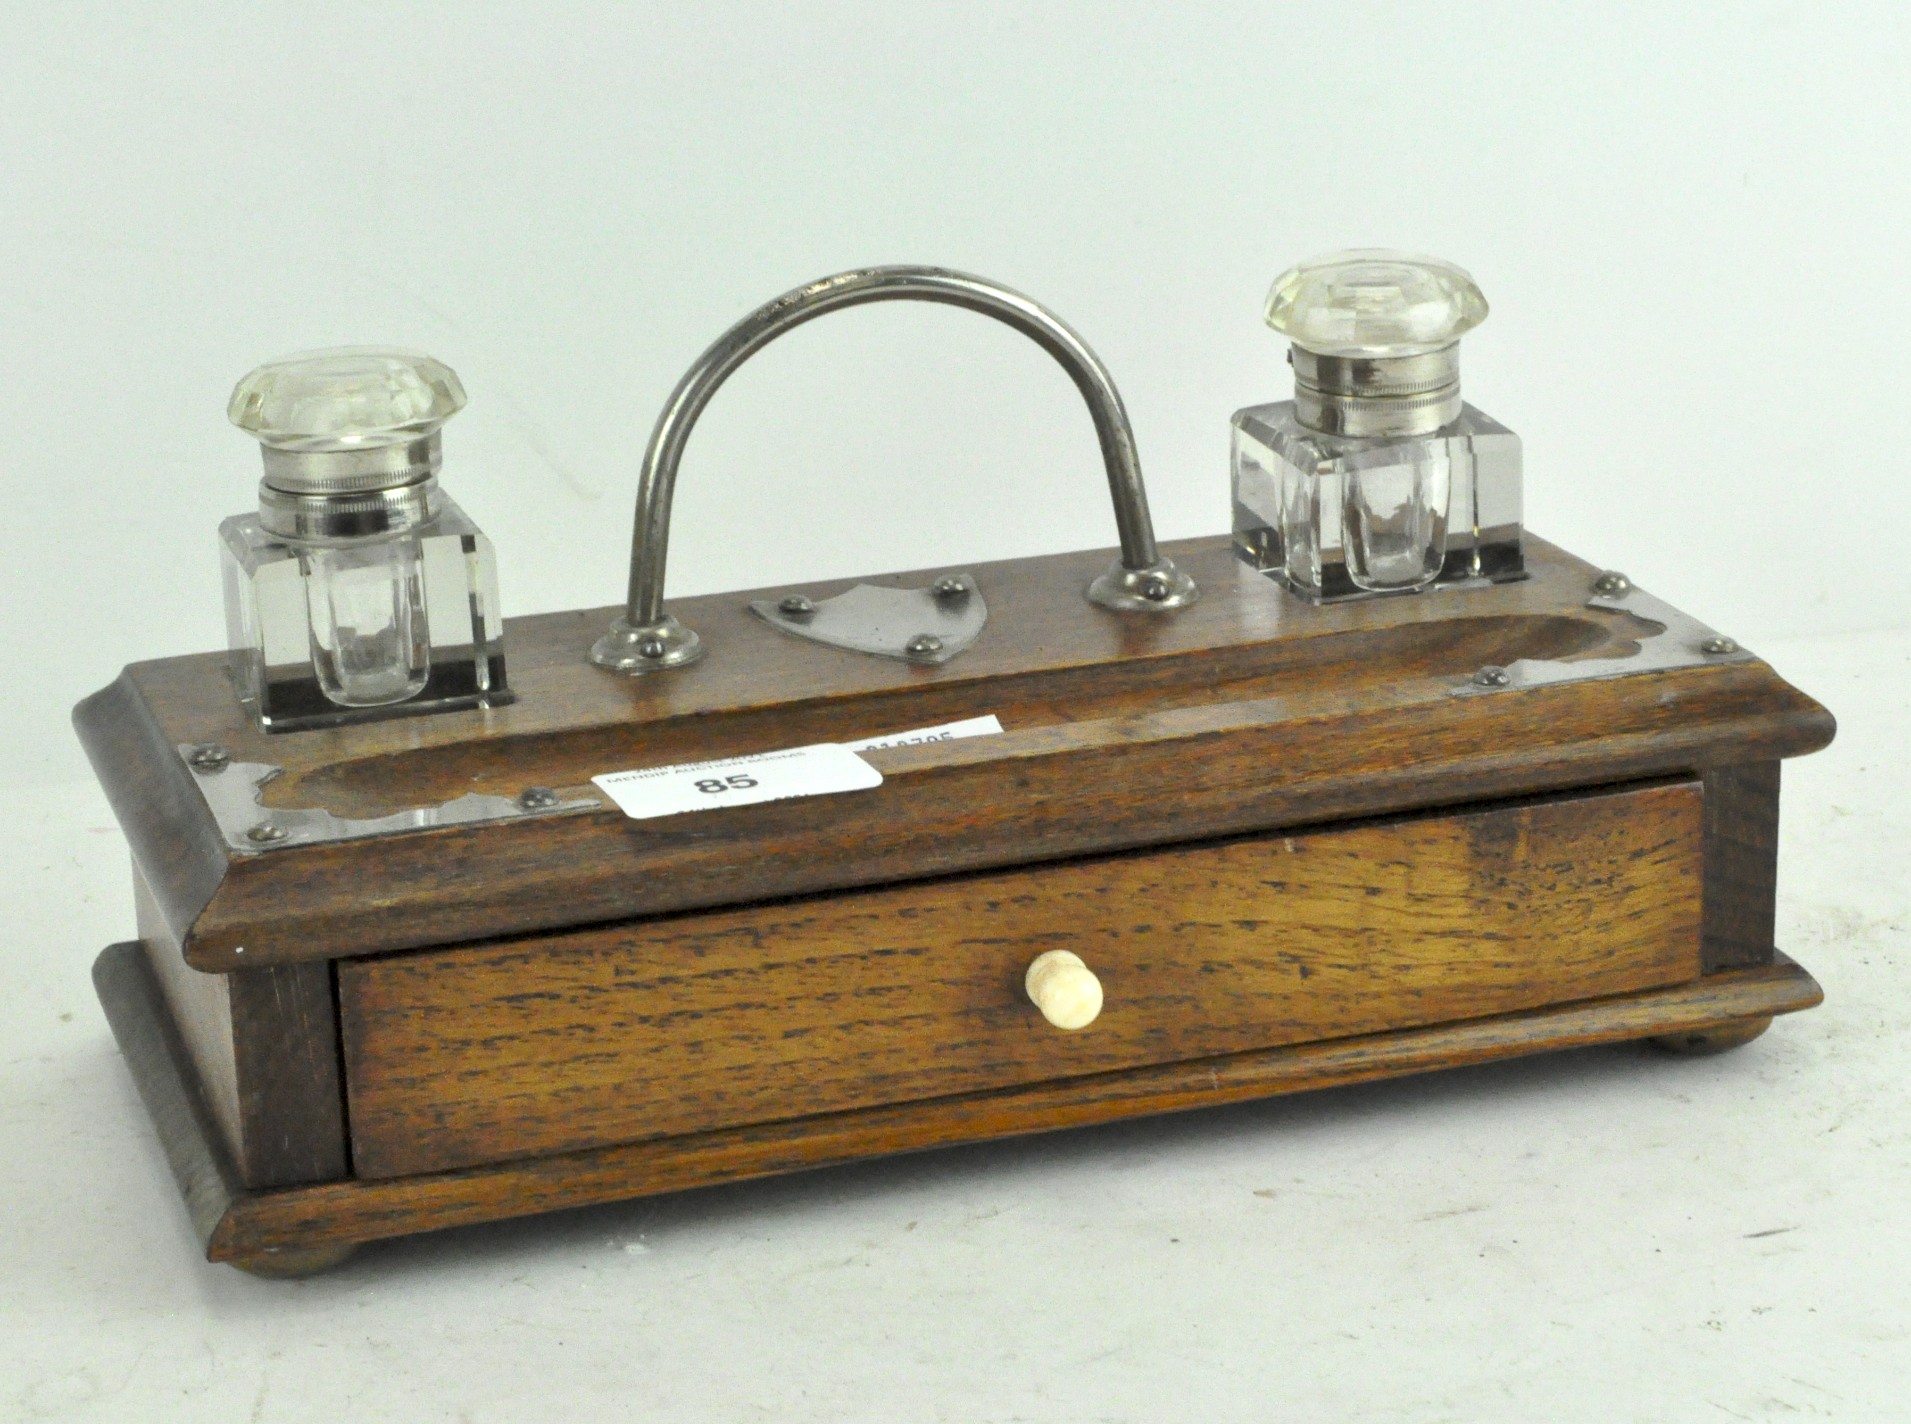 An Edwardian oak and metal-mounted desk set of rectangular form, with two glass inkwells,